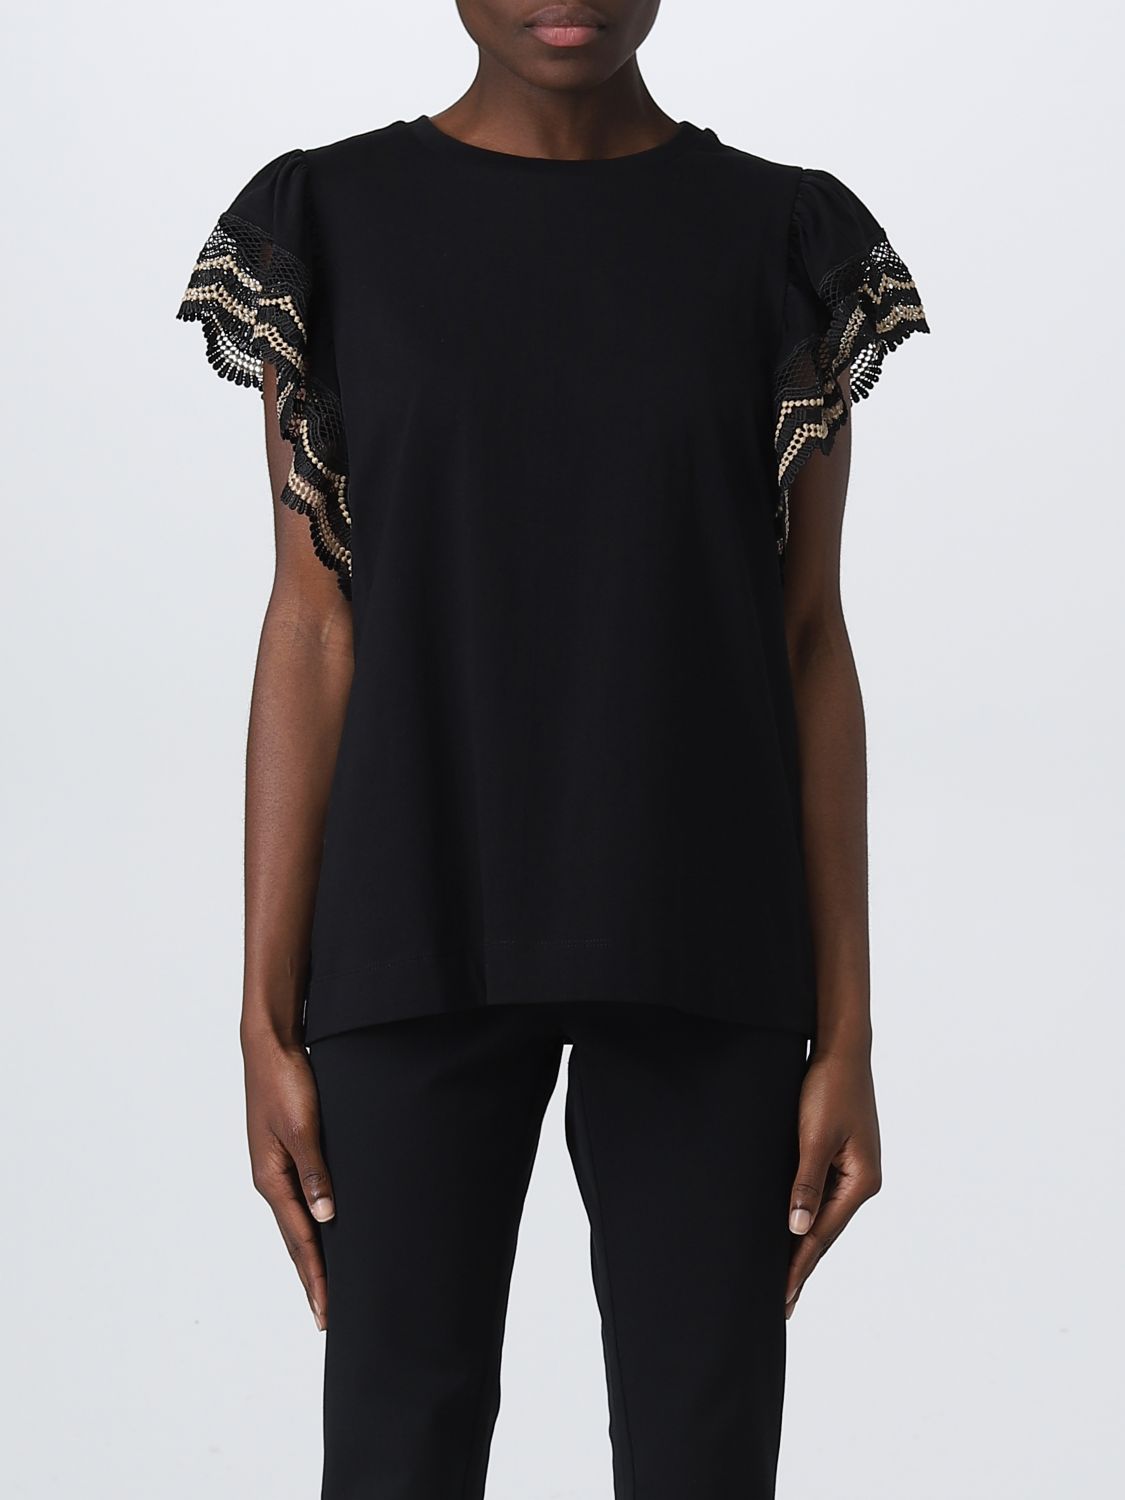 TWINSET: T-shirt in jersey with macramé lace edges - Black | Twinset t ...